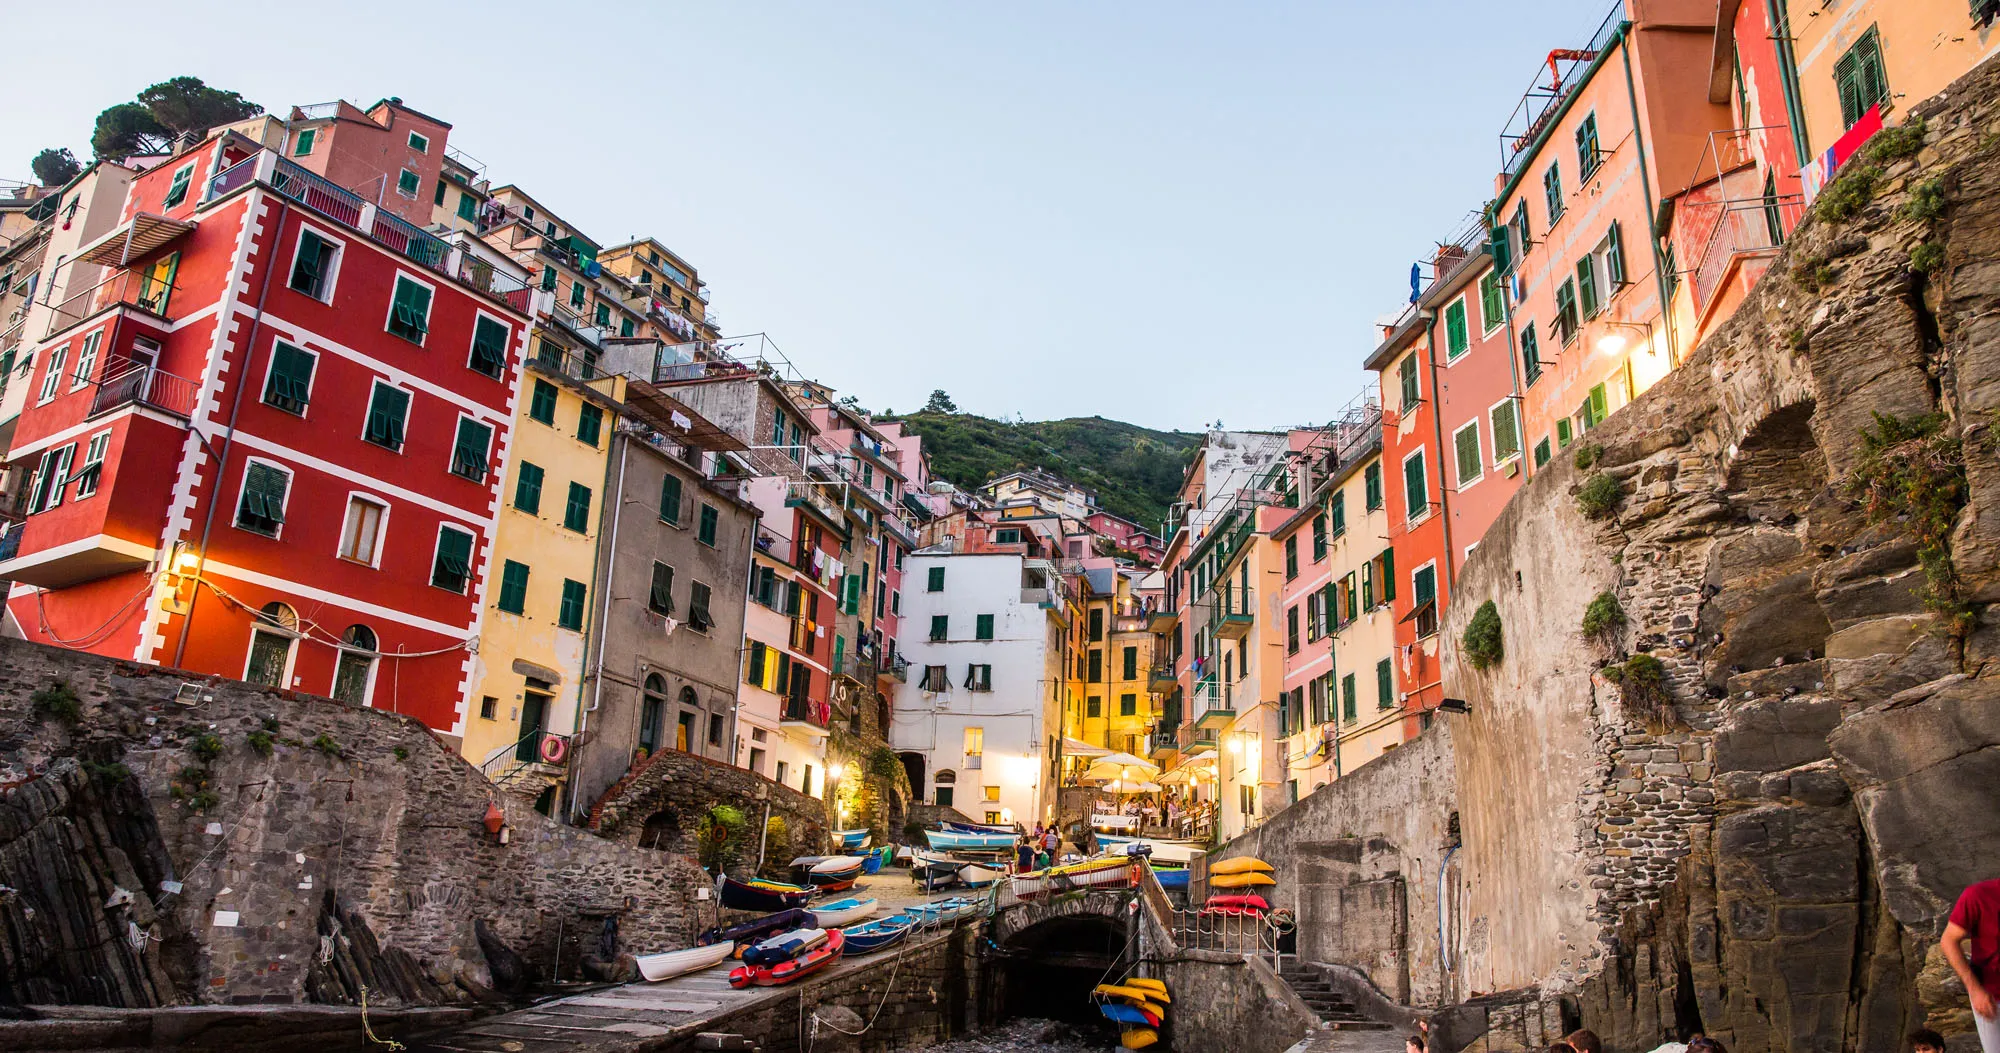 Featured image for “The Cinque Terre for Budget Travelers”